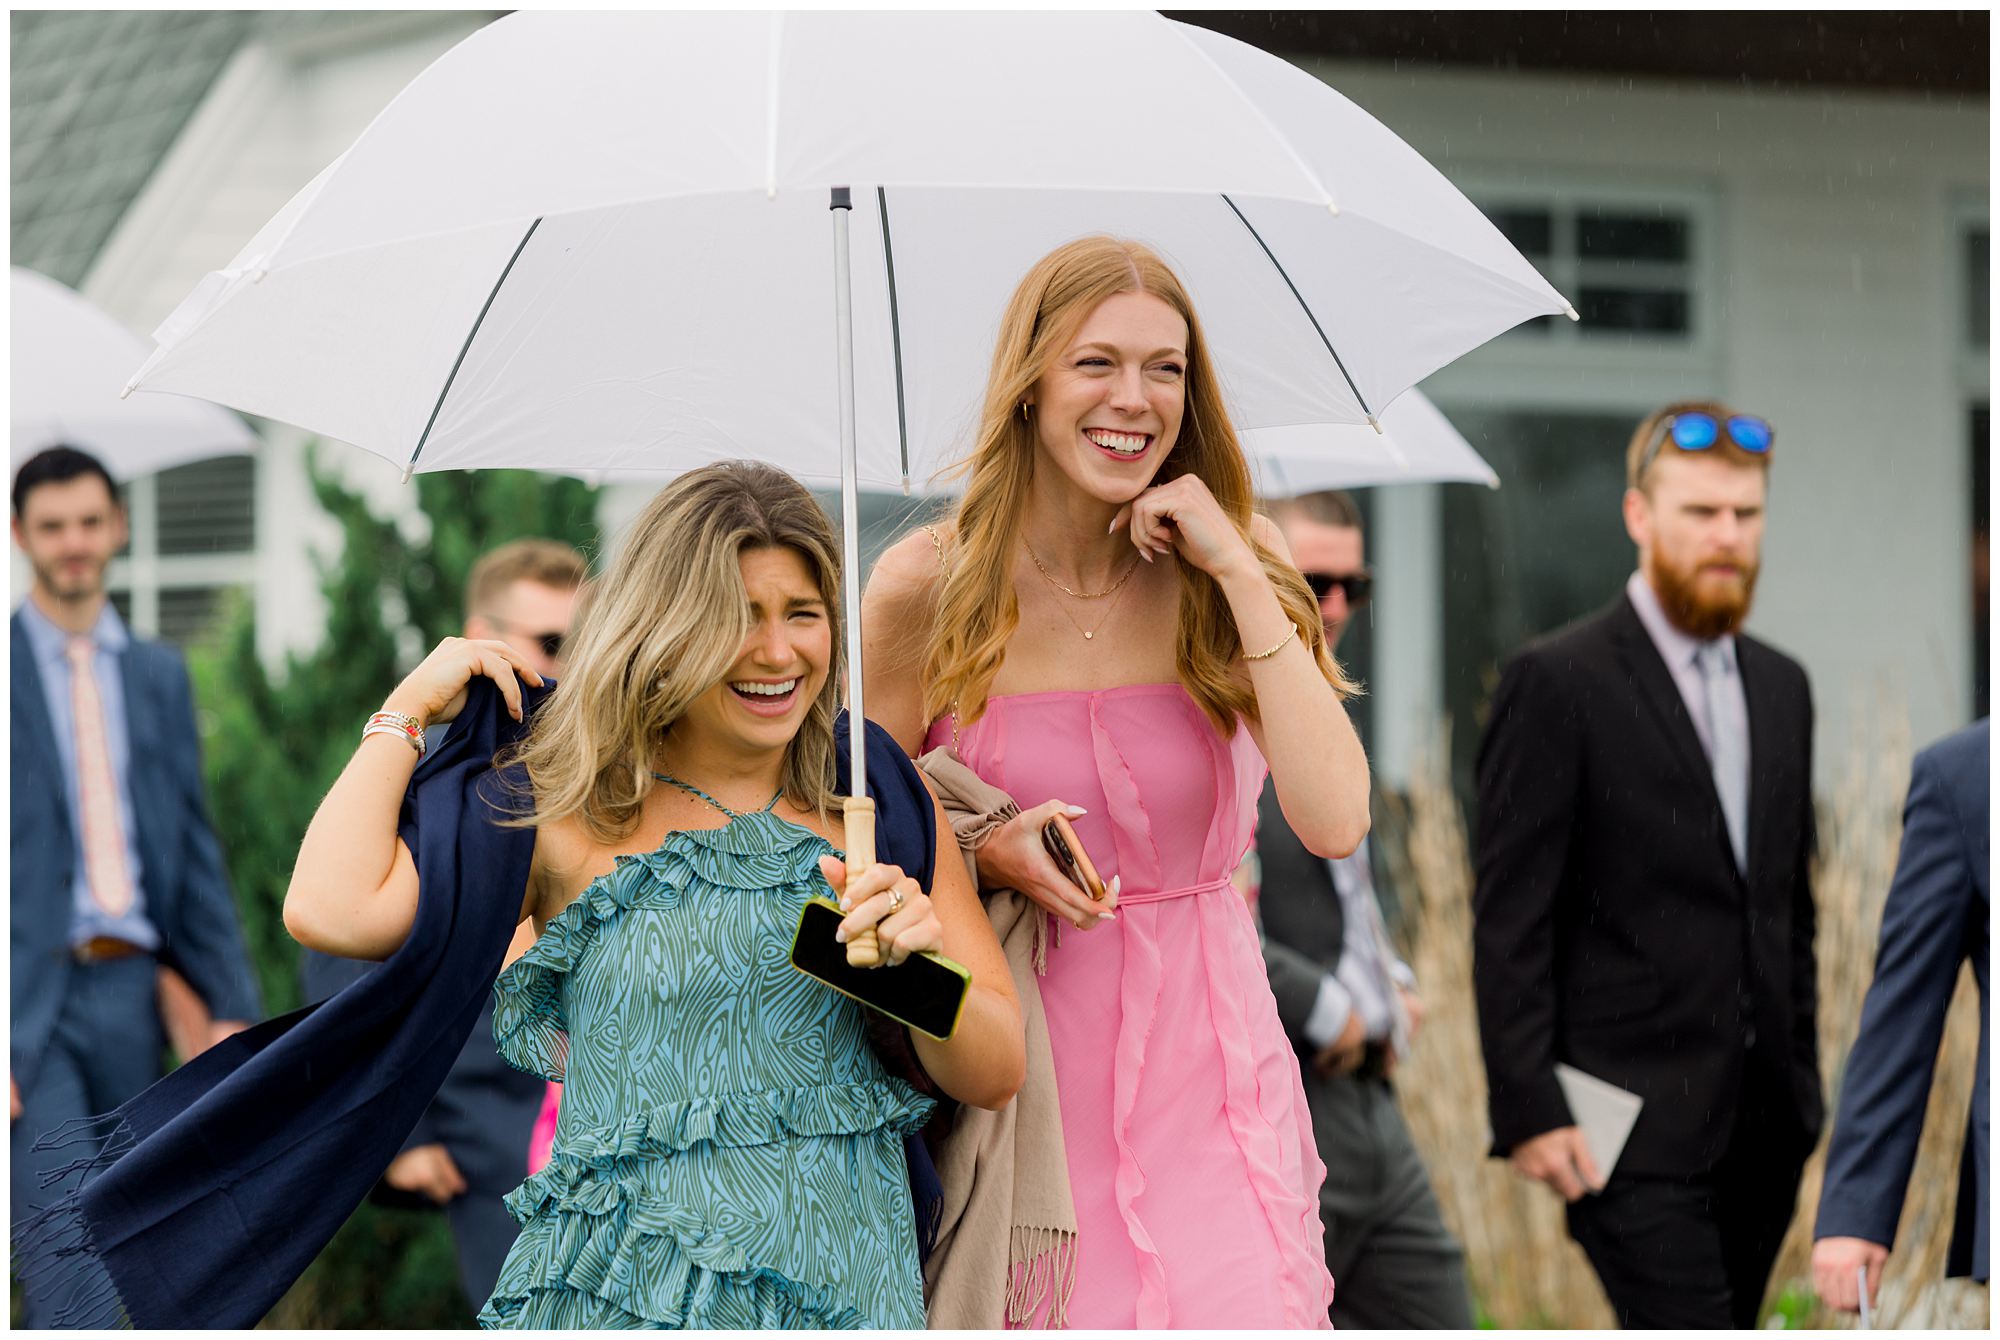 rainy day wedding candids at Viewpoint hotel in York Maine. Wedding Party walking with umbrellas.